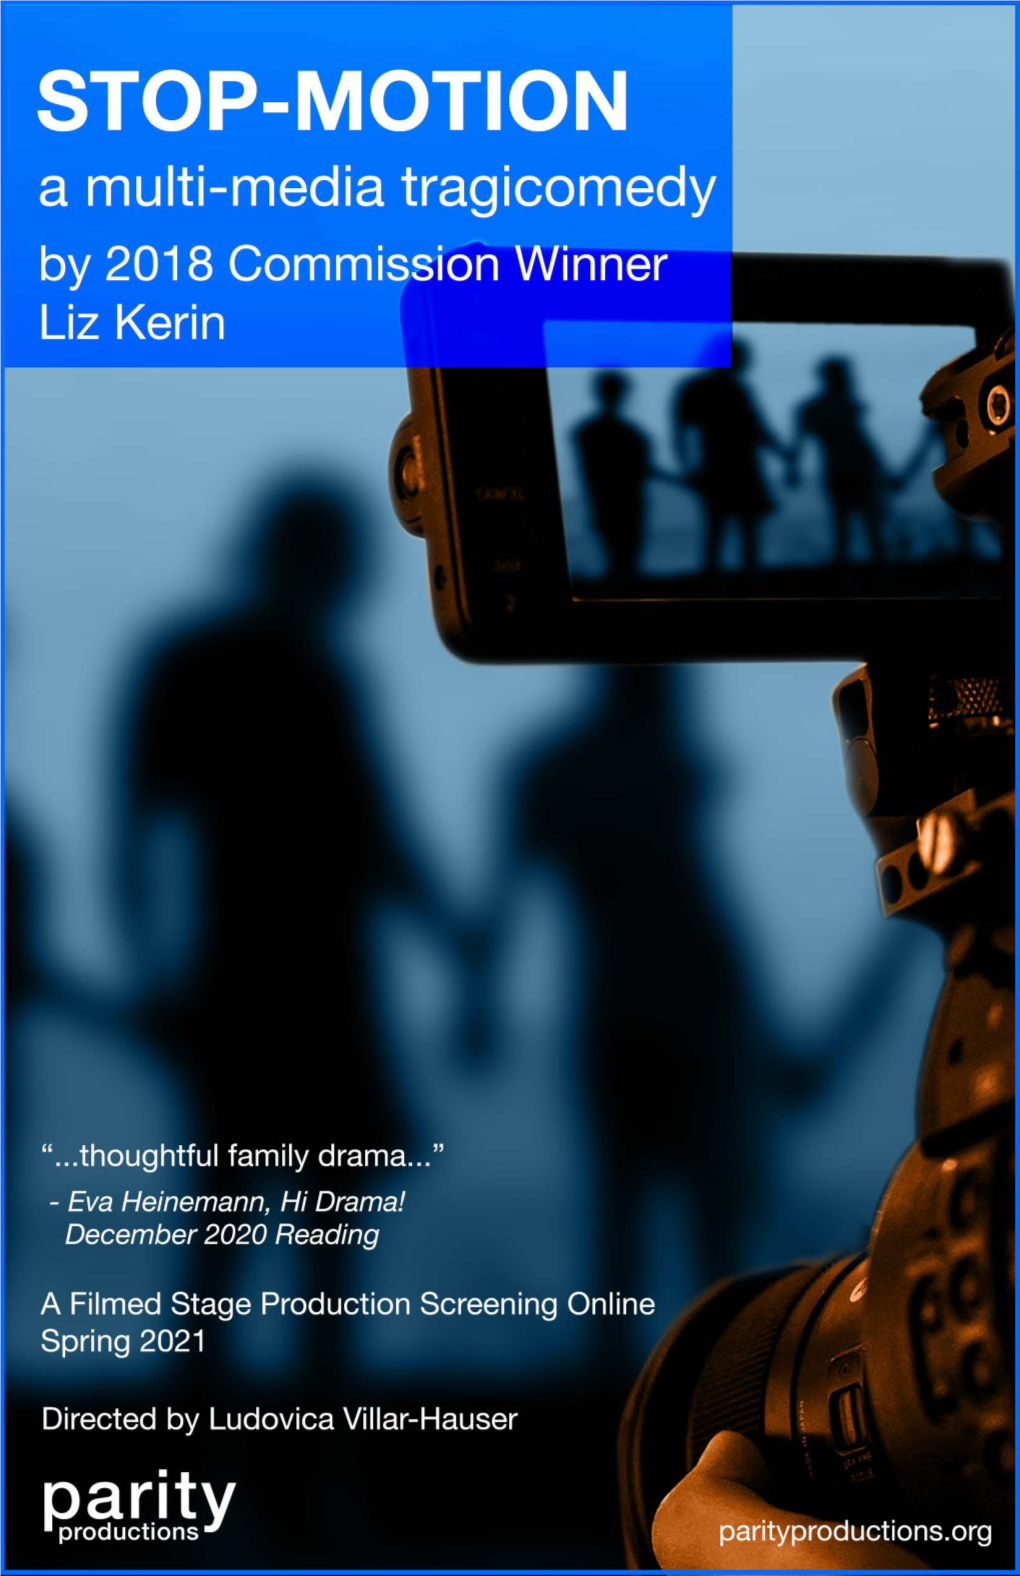 Stop-Motion by 2018 Commission Winner Liz Kerin Is Produced with the Generous Support of the Poomer Fund